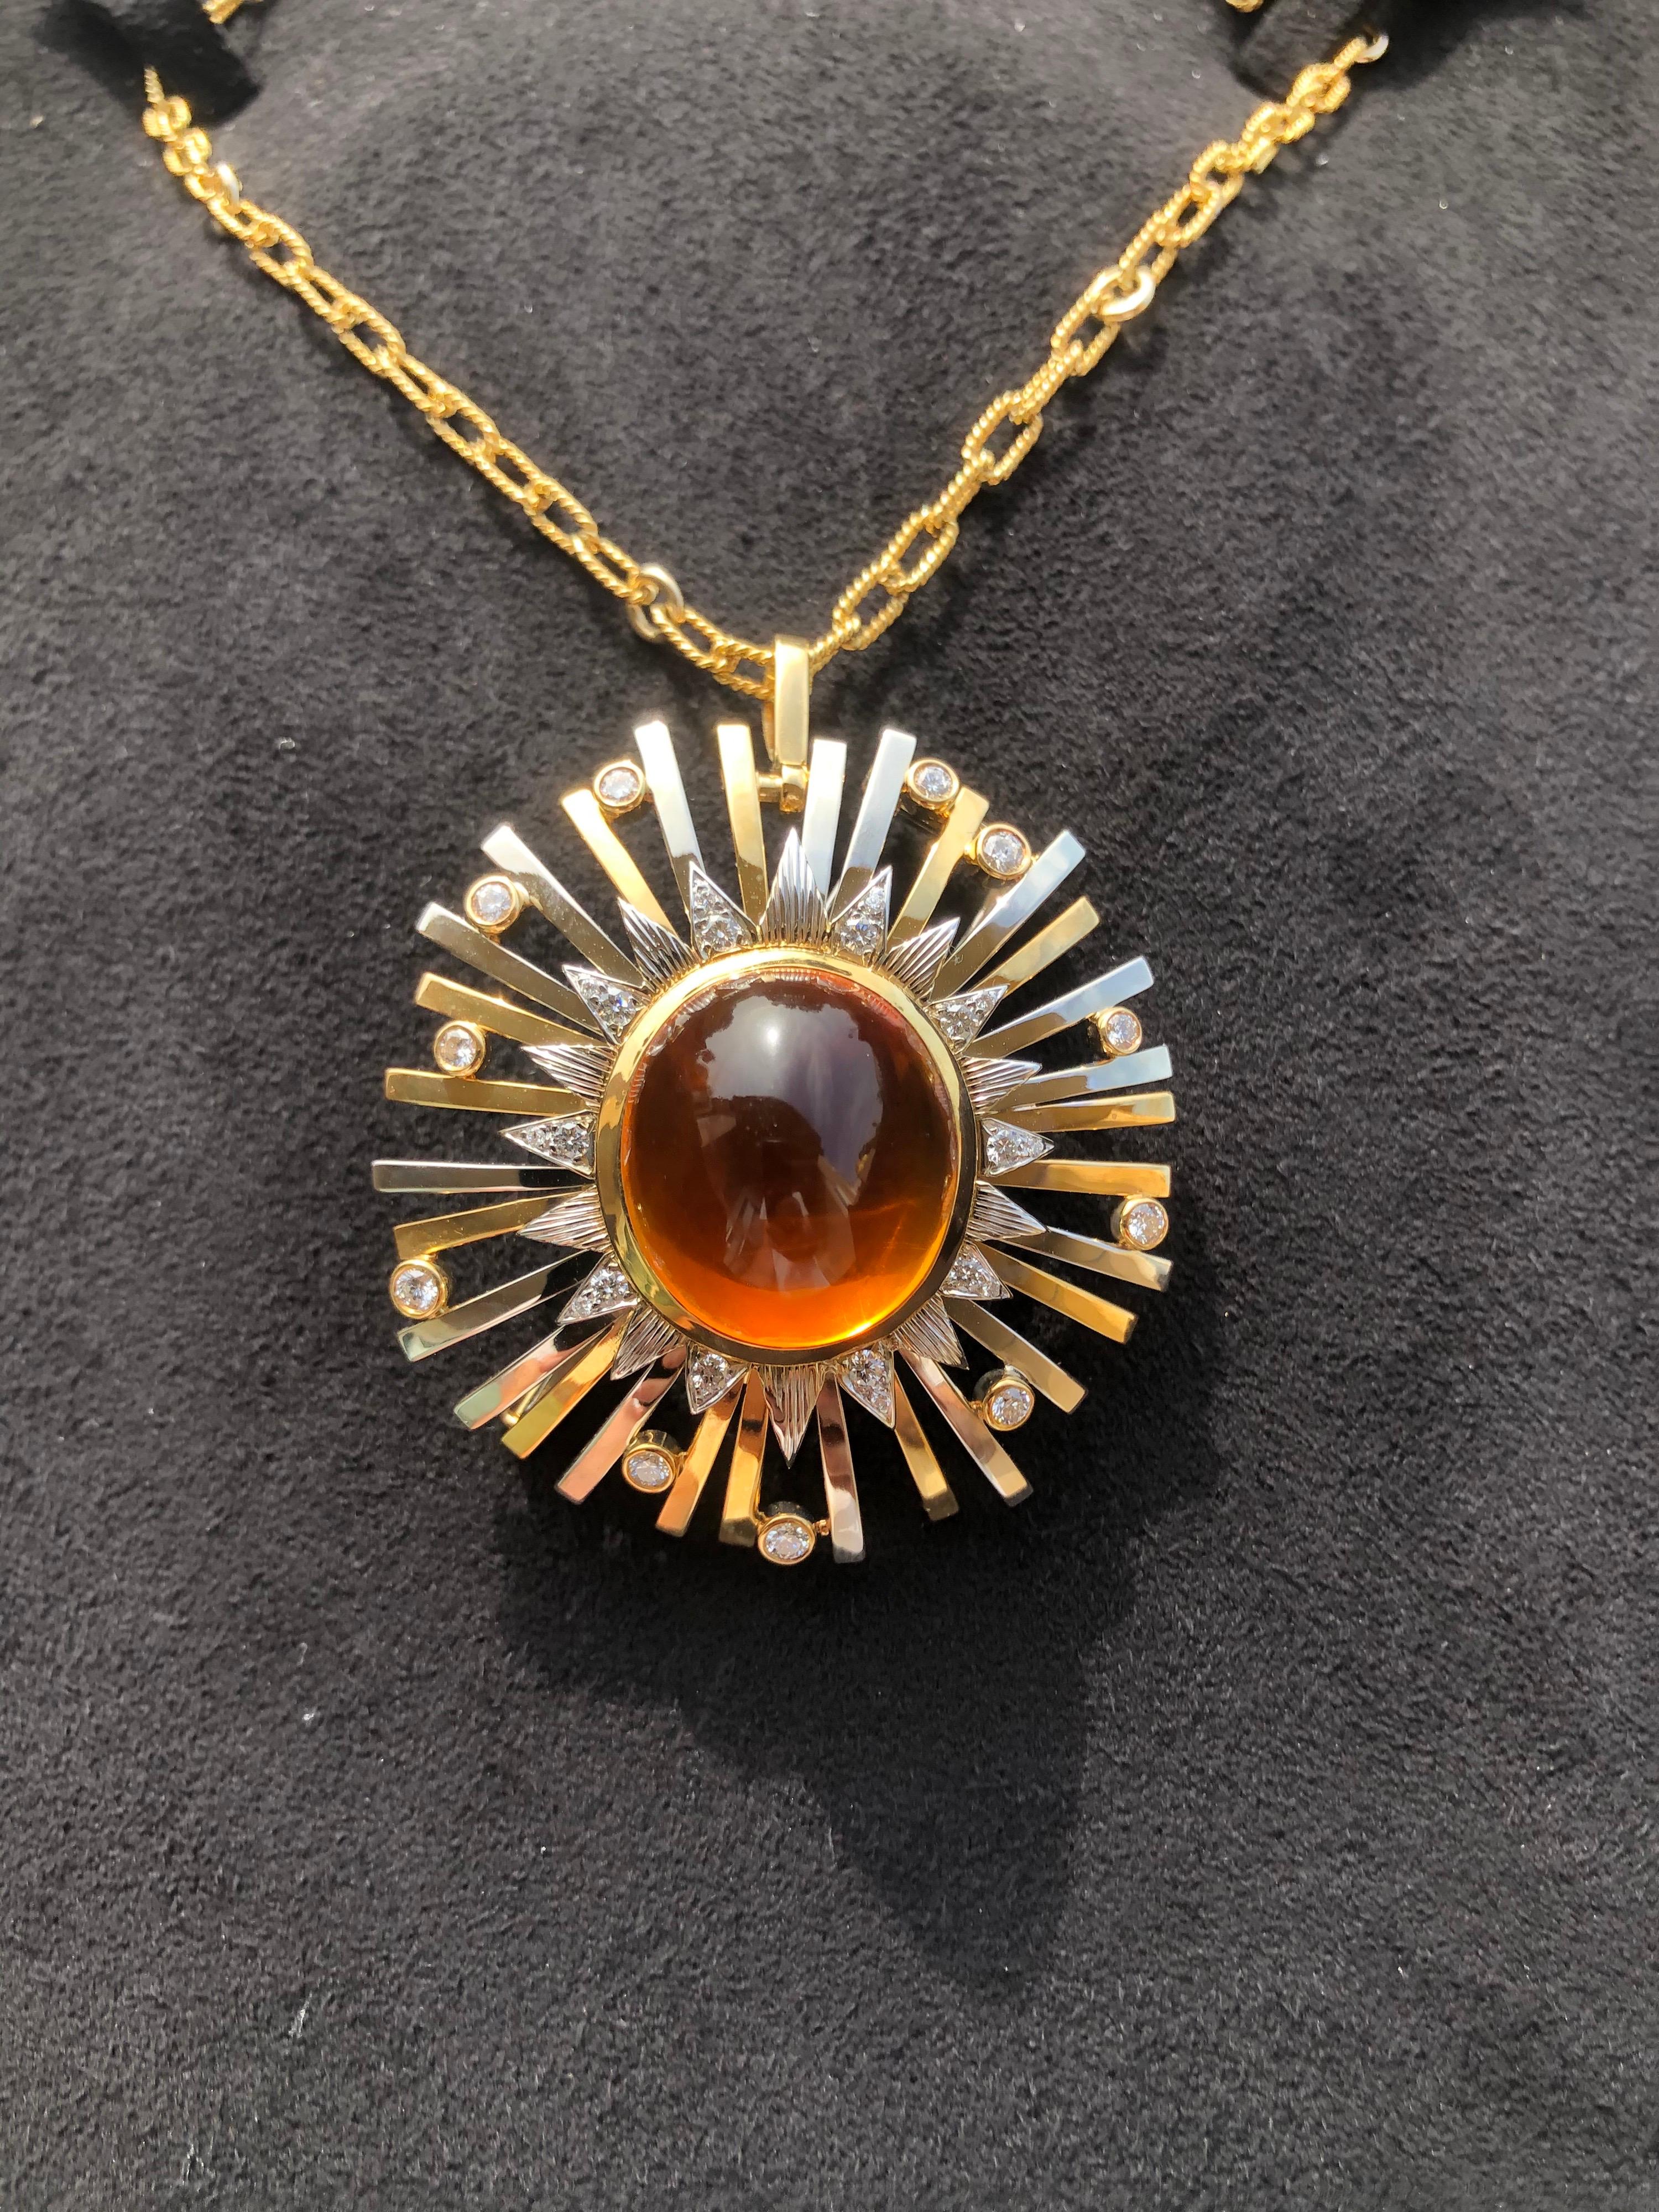 Madeira Citrine Cabochon 24.14 Carat Pendant Necklace Brooch For Sale 13